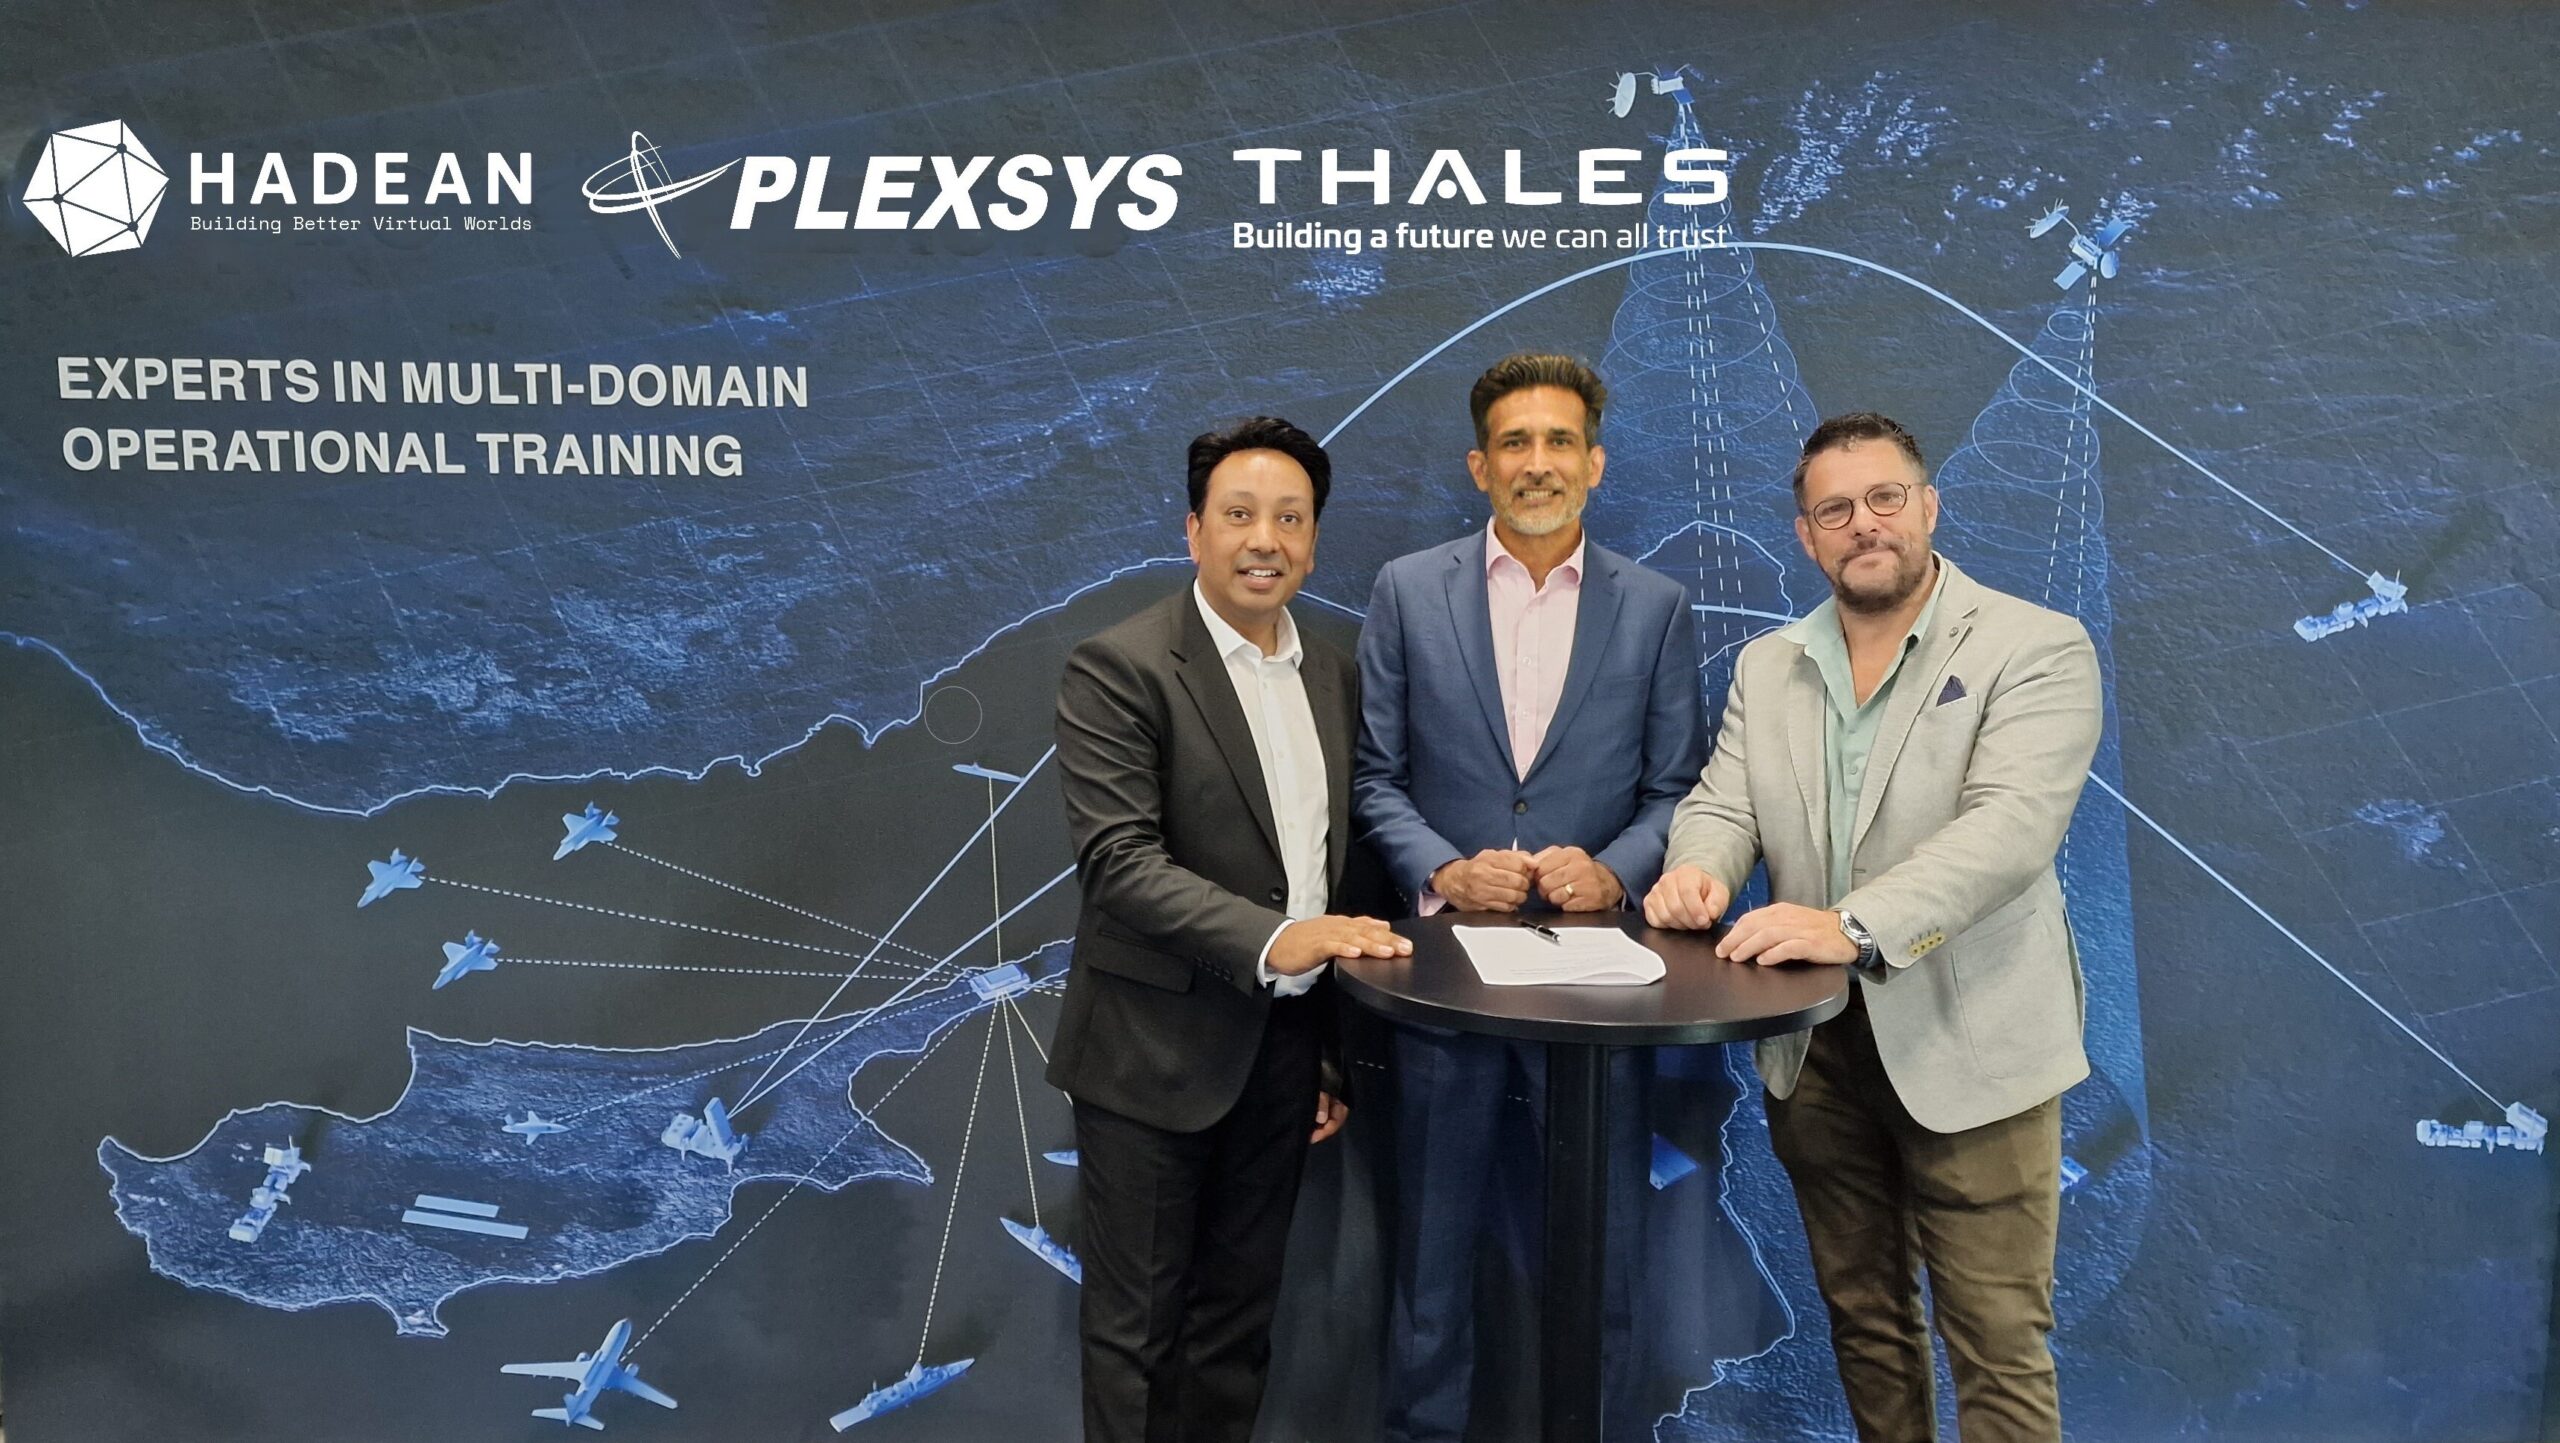 Thales, PLEXSYS and Hadean building next generation training solutions